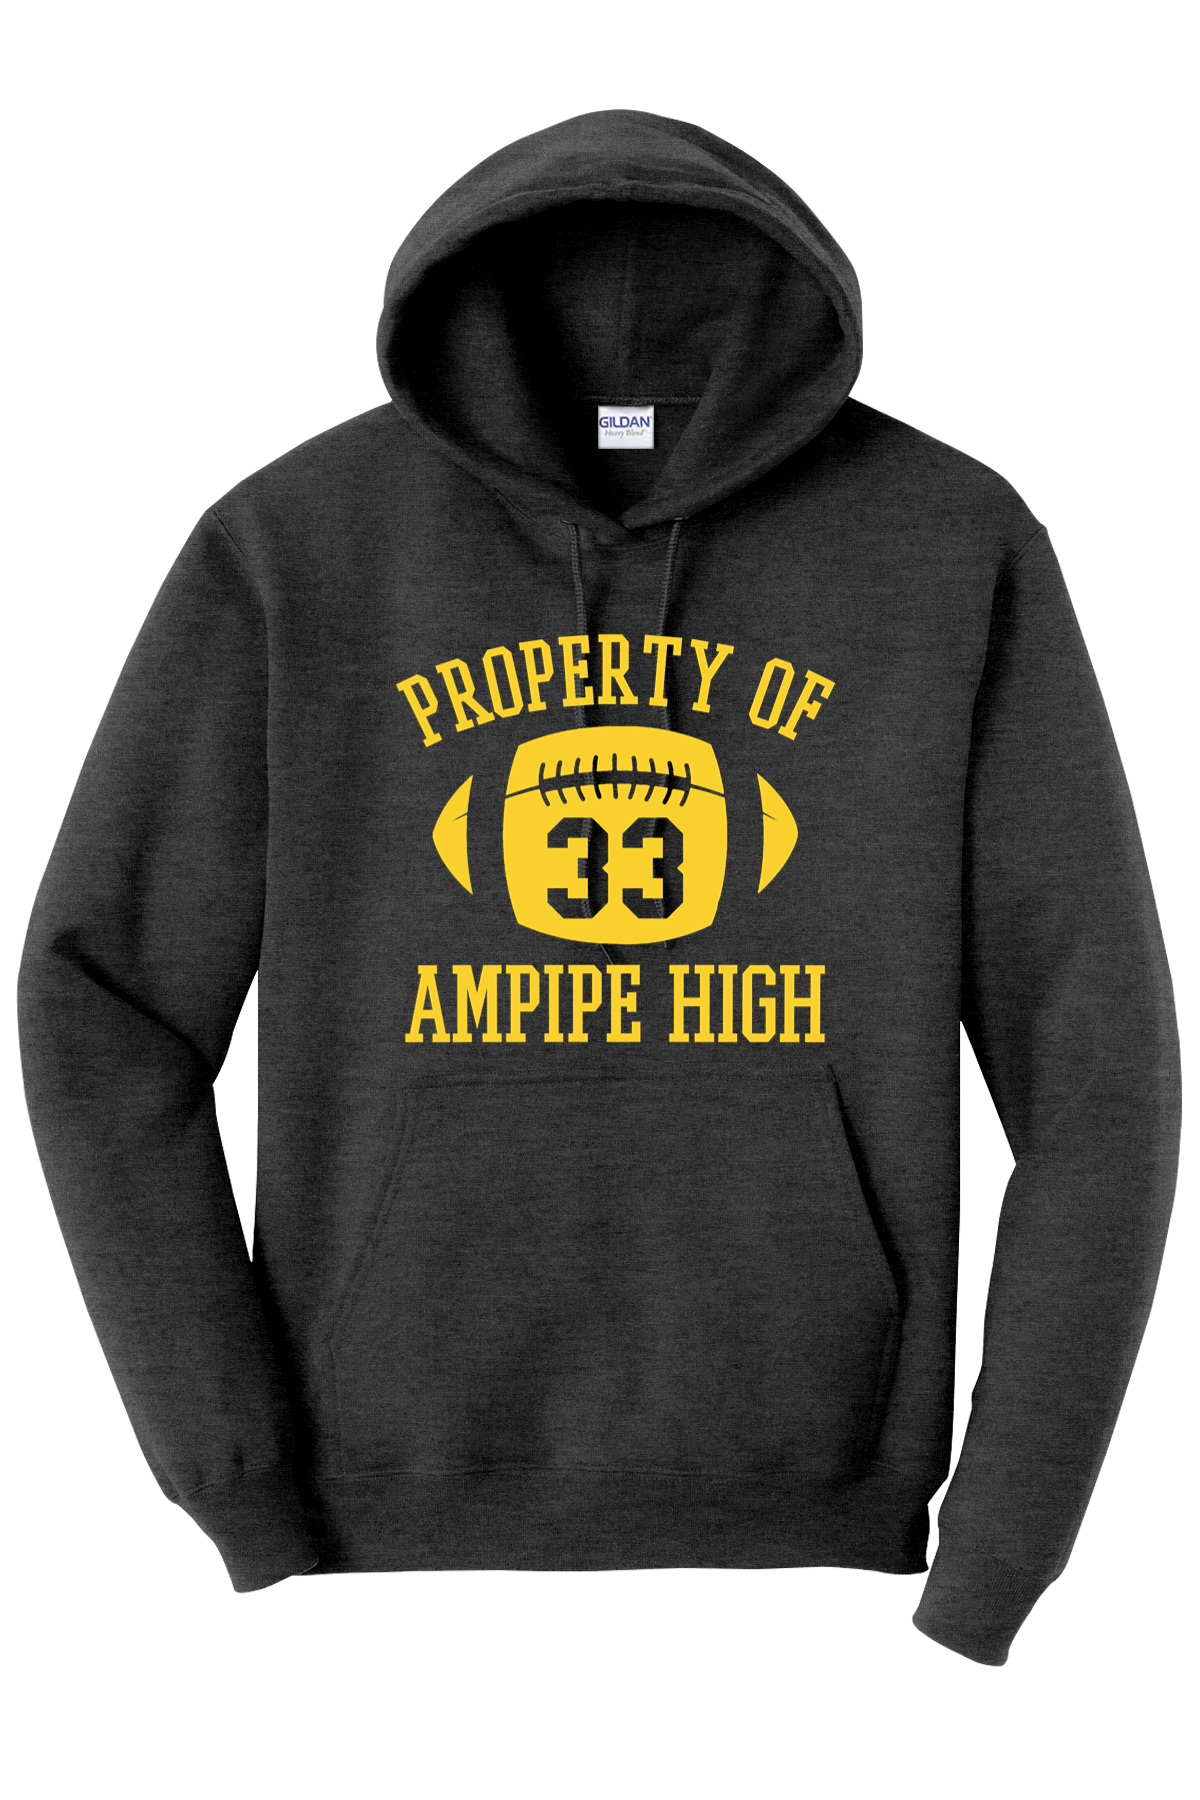 Property of Ampipe High (All the Right Moves) - Hoodie - Yinzylvania